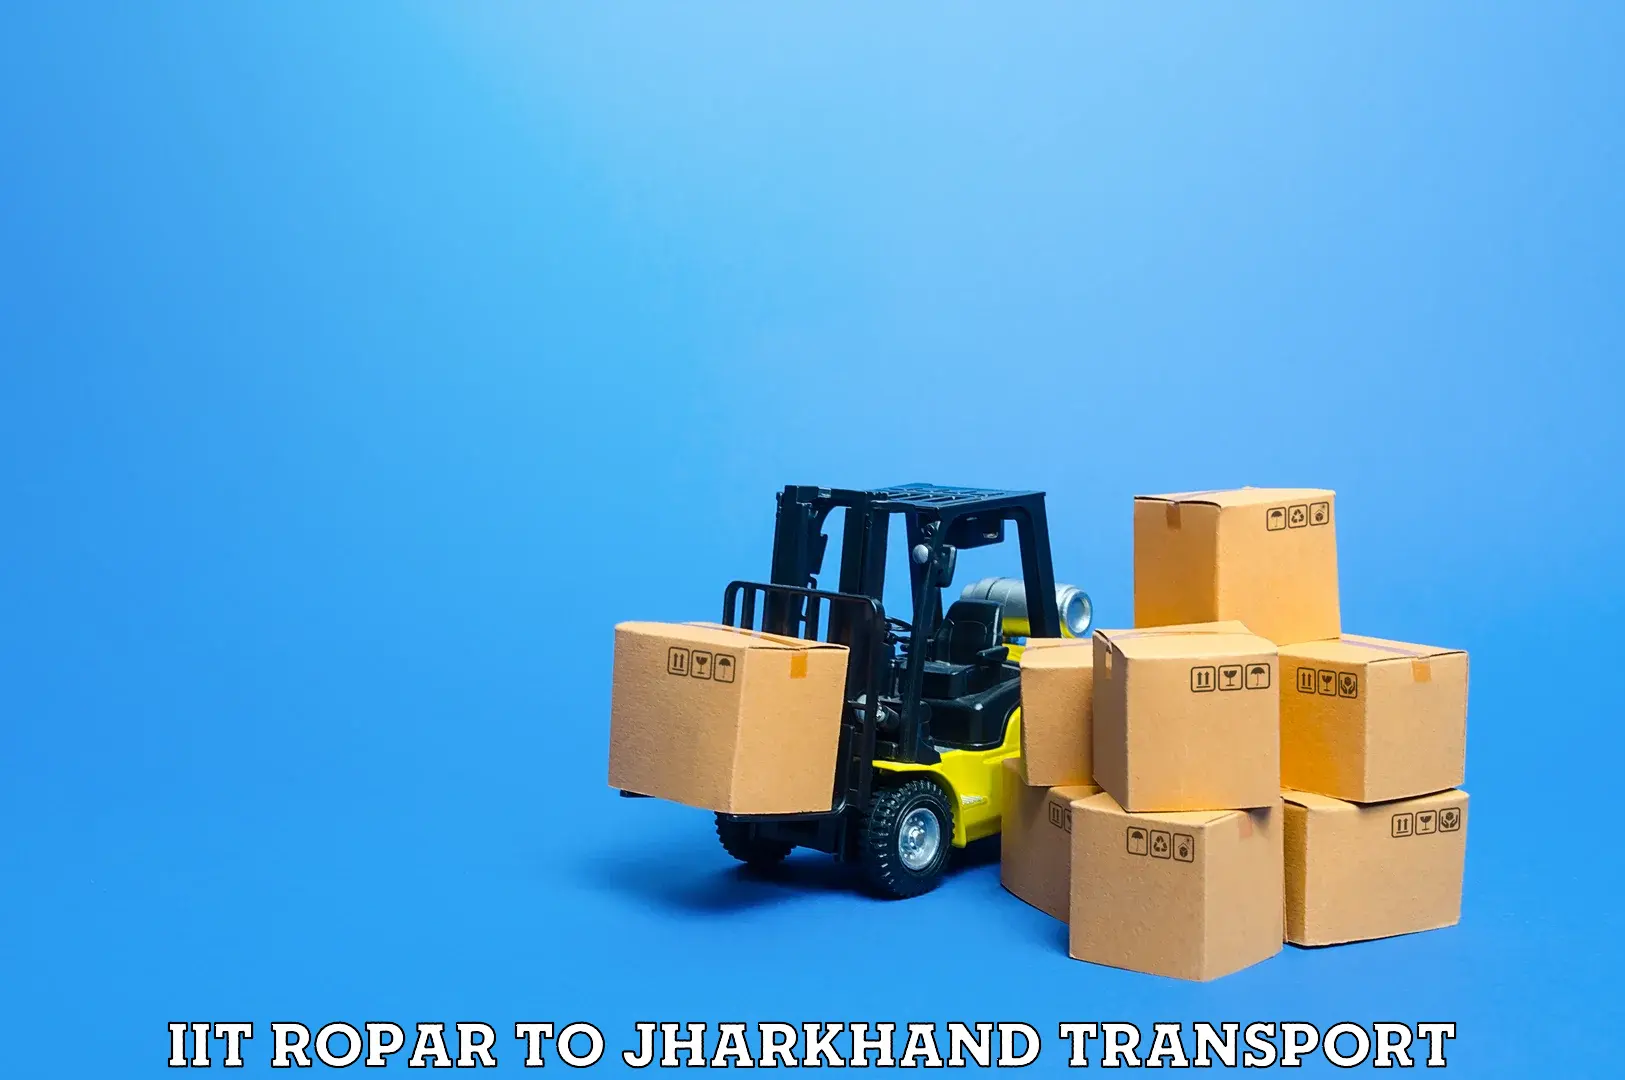 Container transport service IIT Ropar to Shikaripara